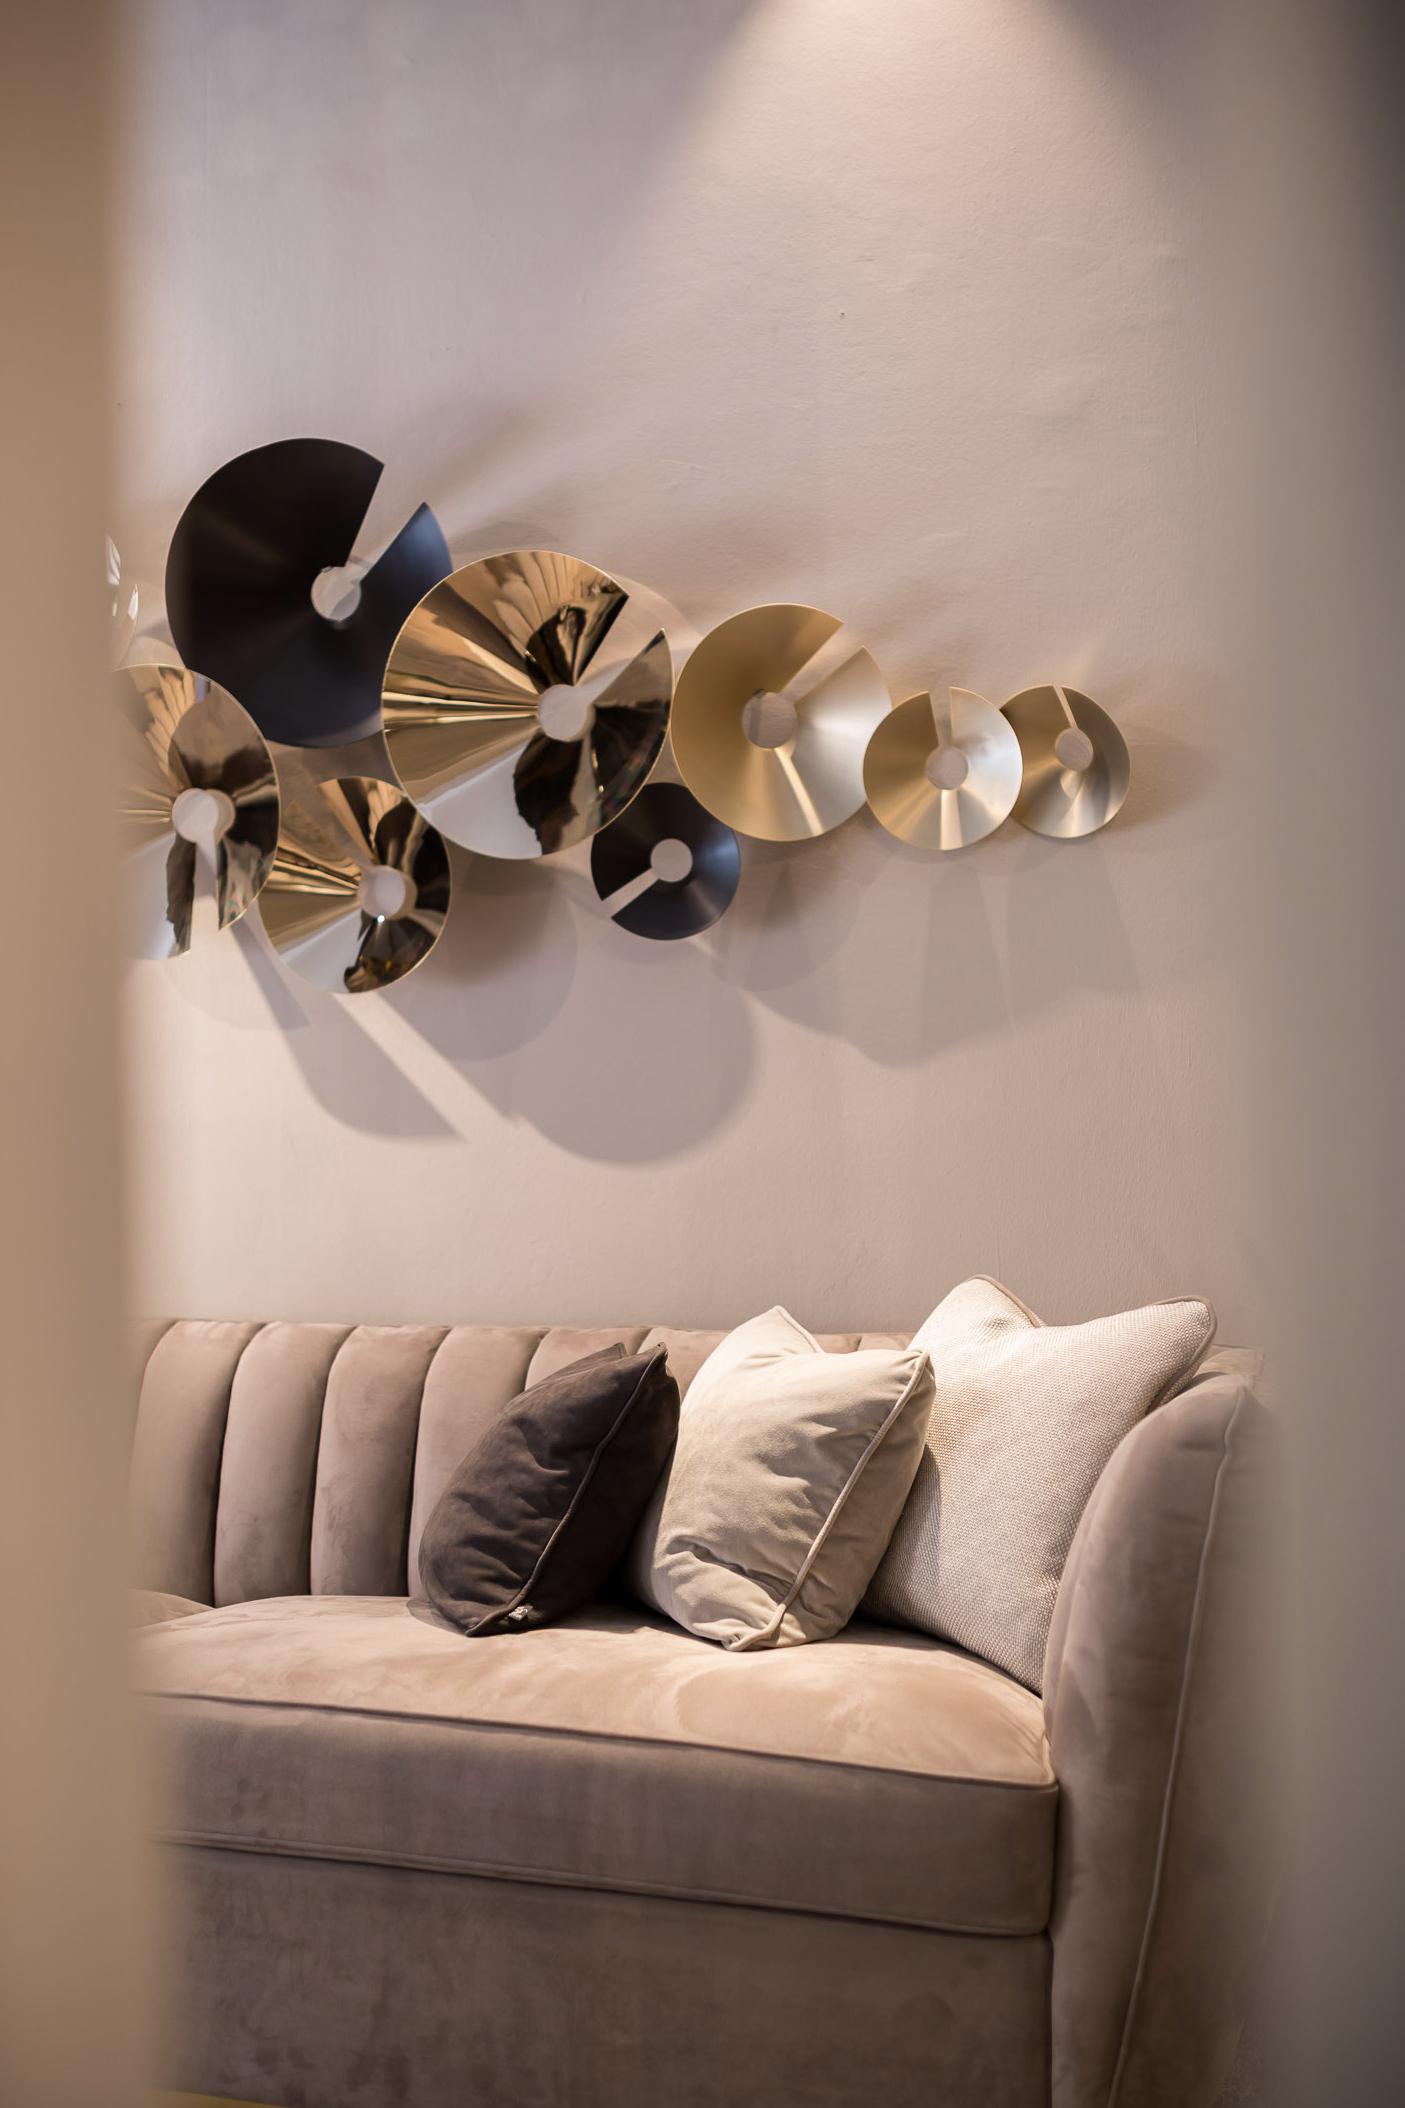 Abstract metal wall  contemporary sculpture by Andrea Bonini different finish of metals.
The sculpture is designed on the golden section concept and is an abstract game of shadows and shining metal effect.
Hand craft made by the designer in a single